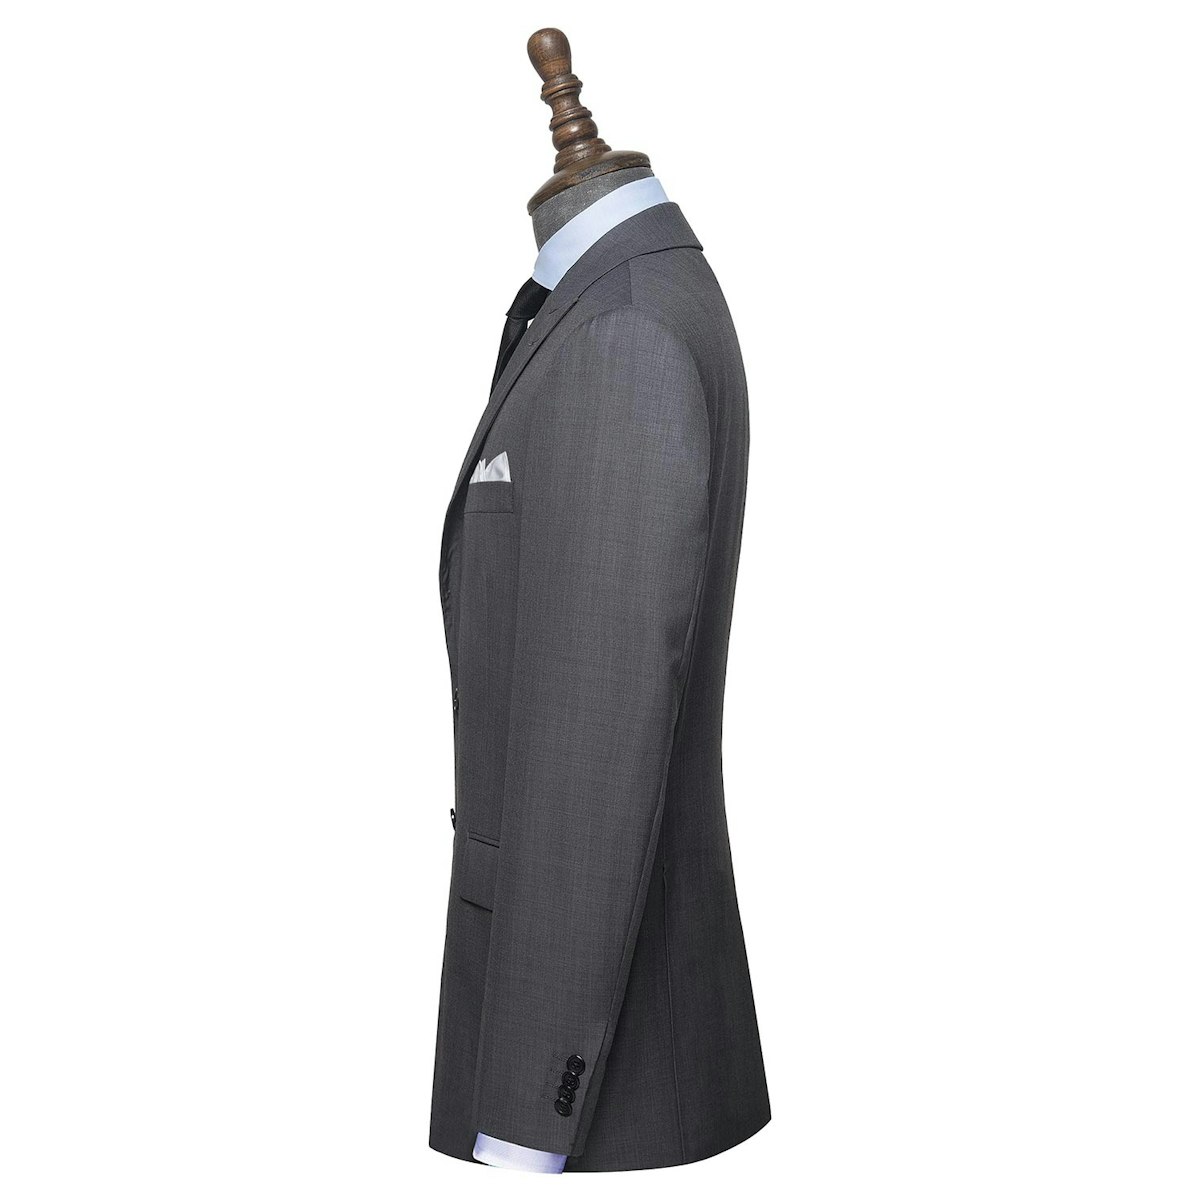 InStitchu Collection The Warwick mens suit